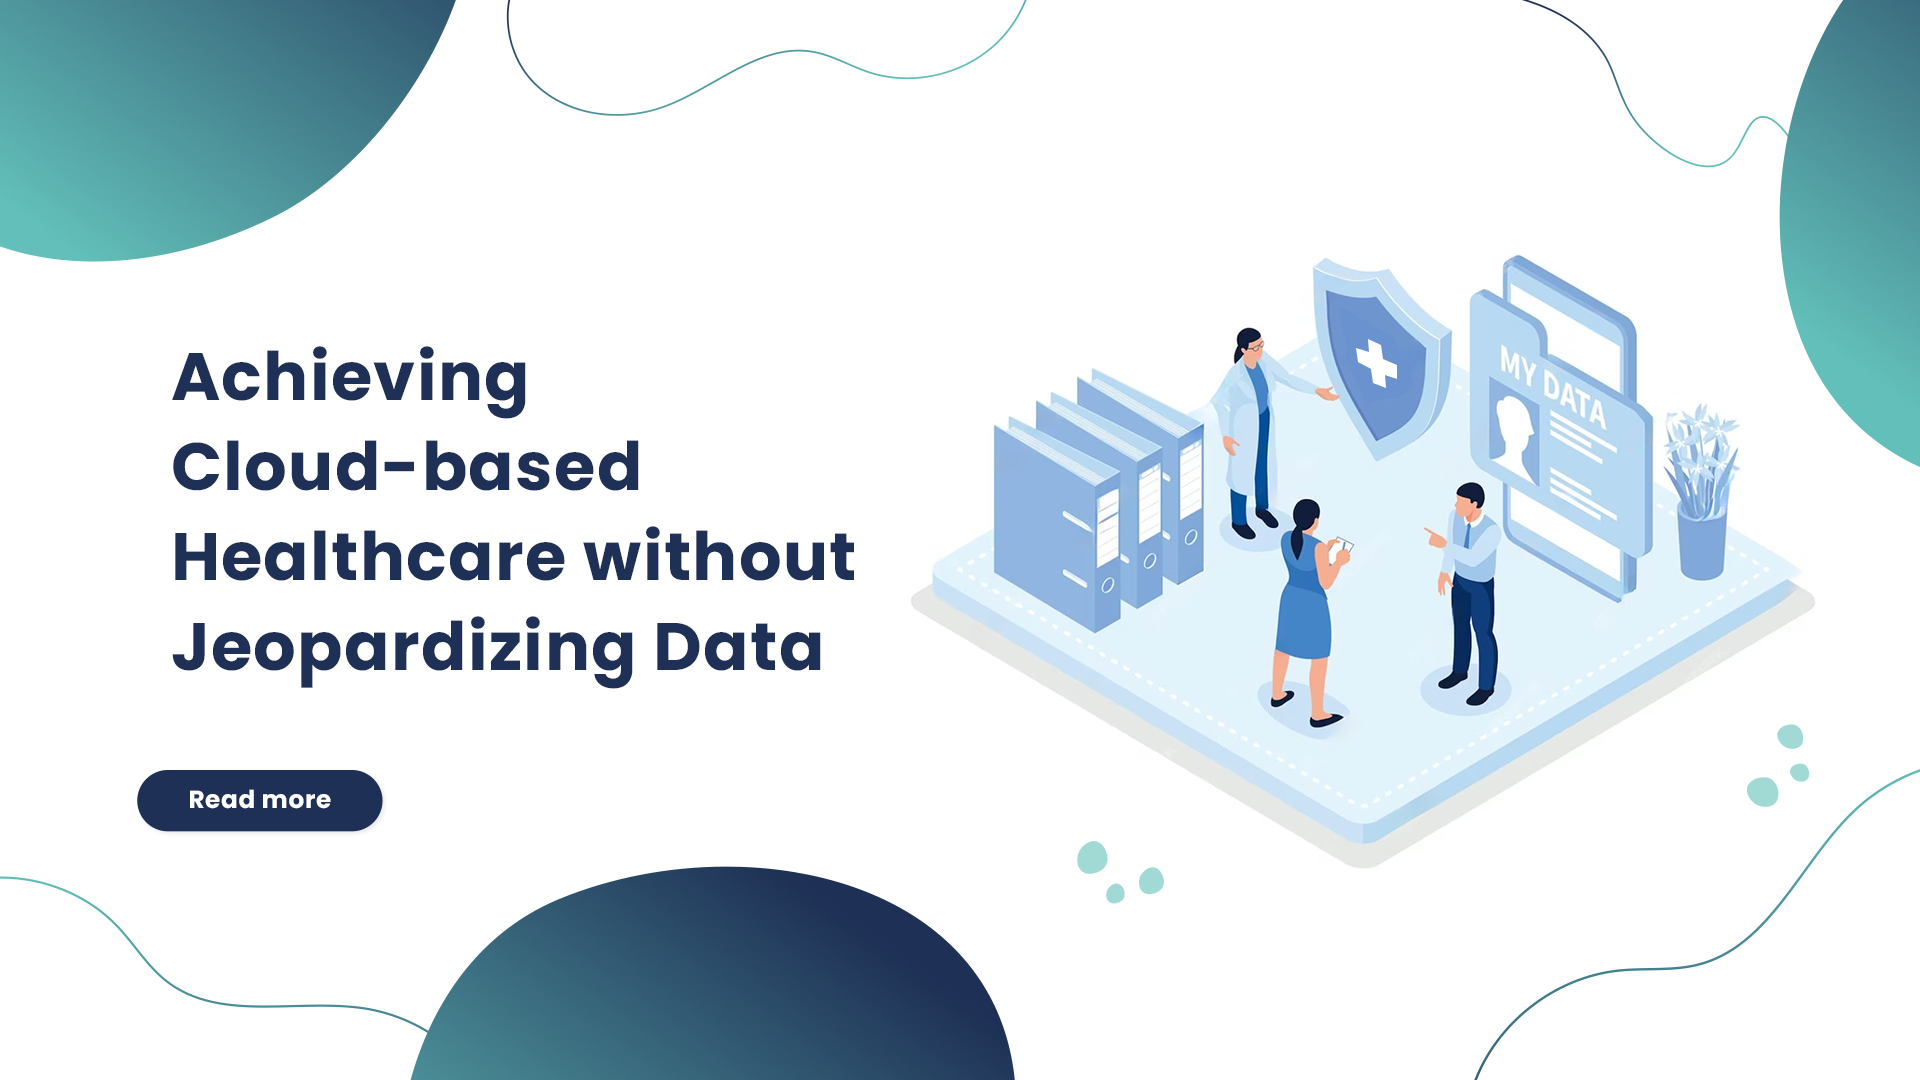 Achieving Cloud-based Healthcare without Jeopardizing Data